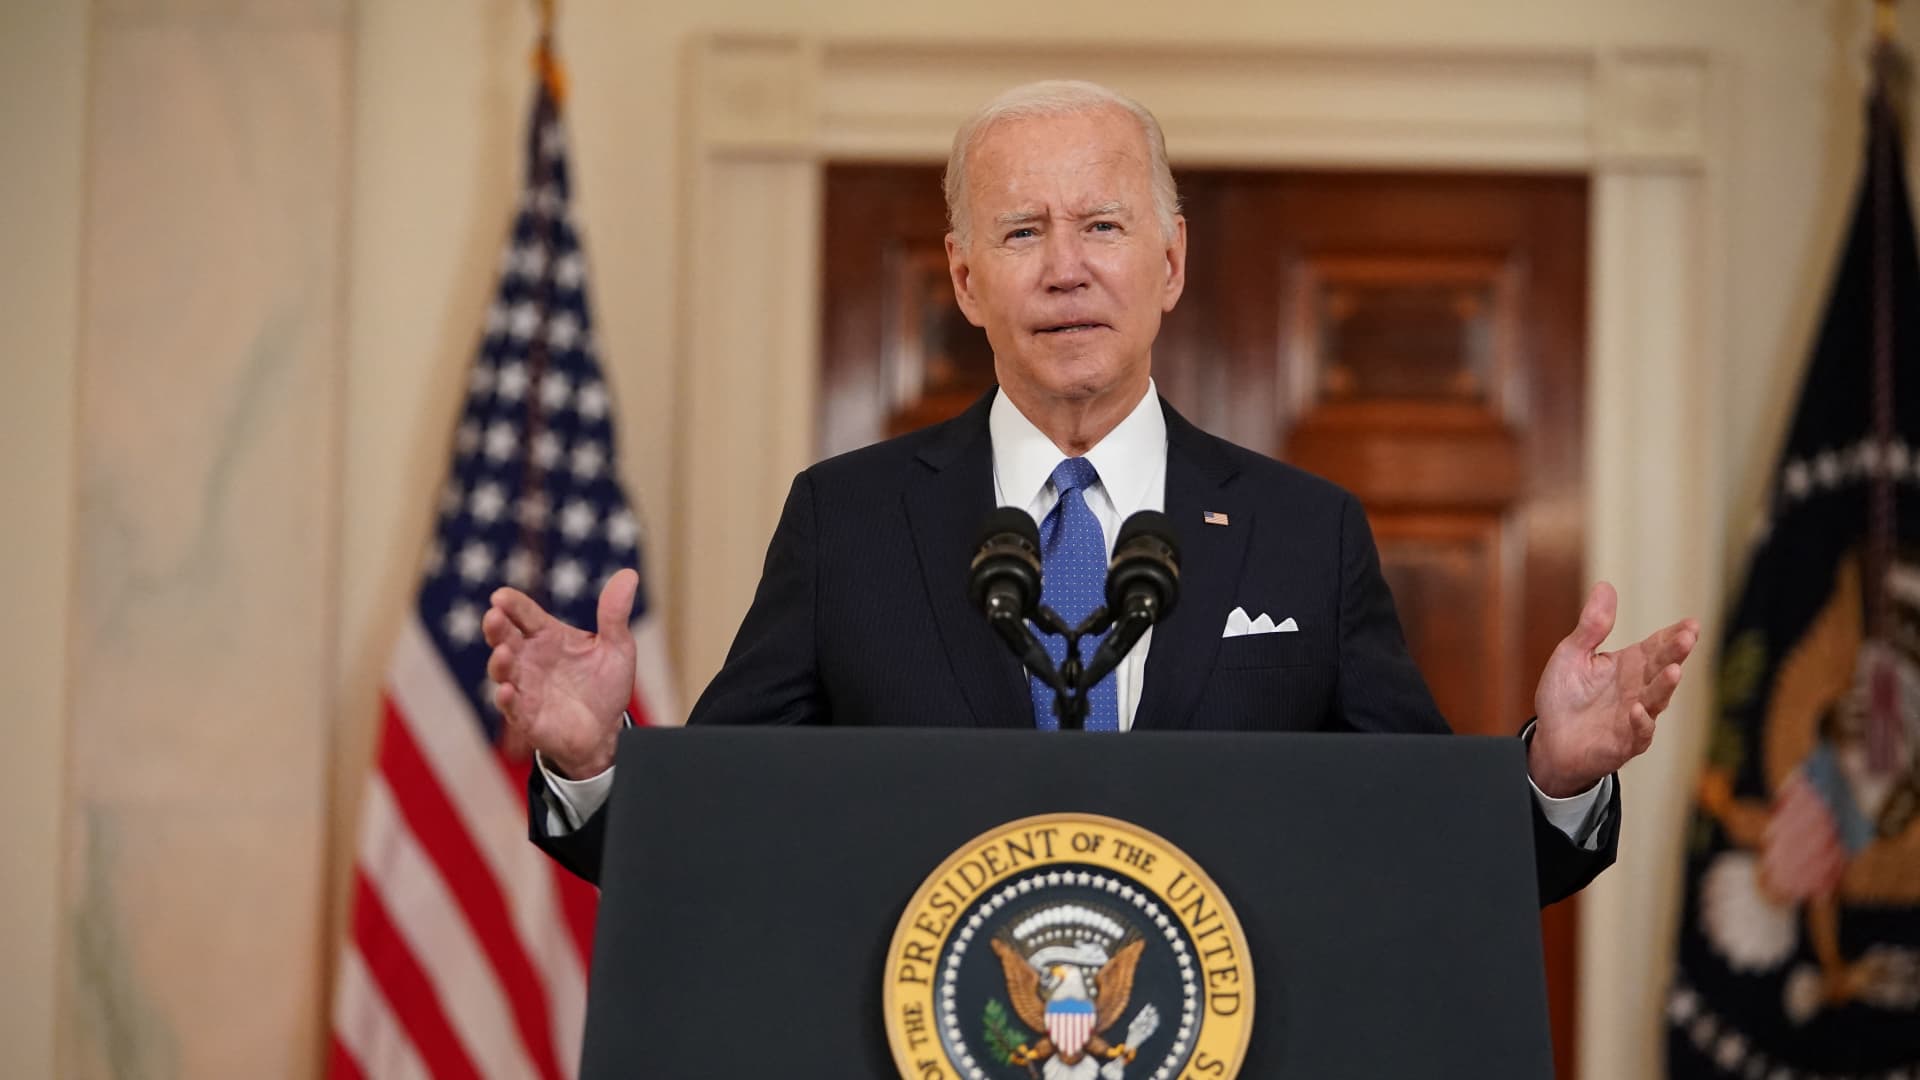 US President Joe Biden addresses the nation at the White House in Washington, DC on June 24, 2022 following the US Supreme Court's decision to overturn Roe vs. Wade.